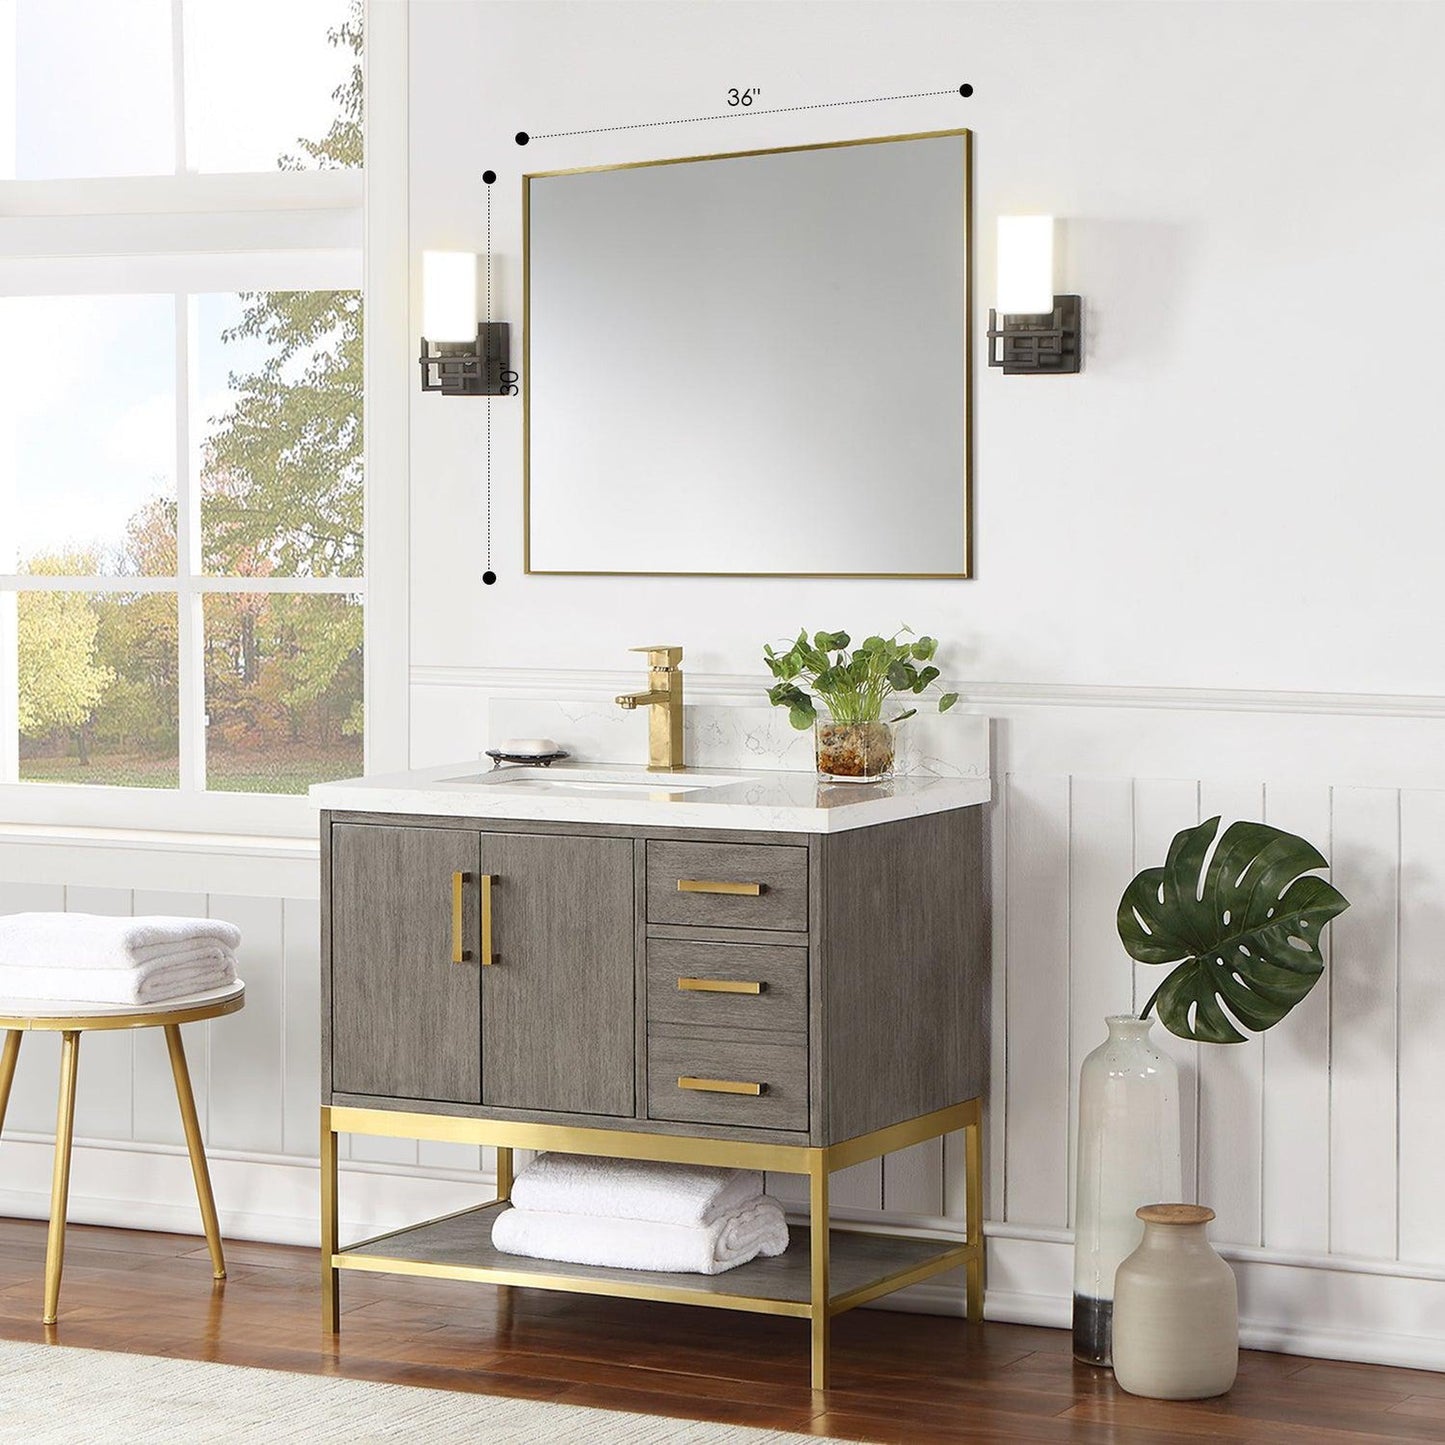 Altair Sassi 36" x 30" Rectangle Brushed Gold Aluminum Framed Wall-Mounted Mirror